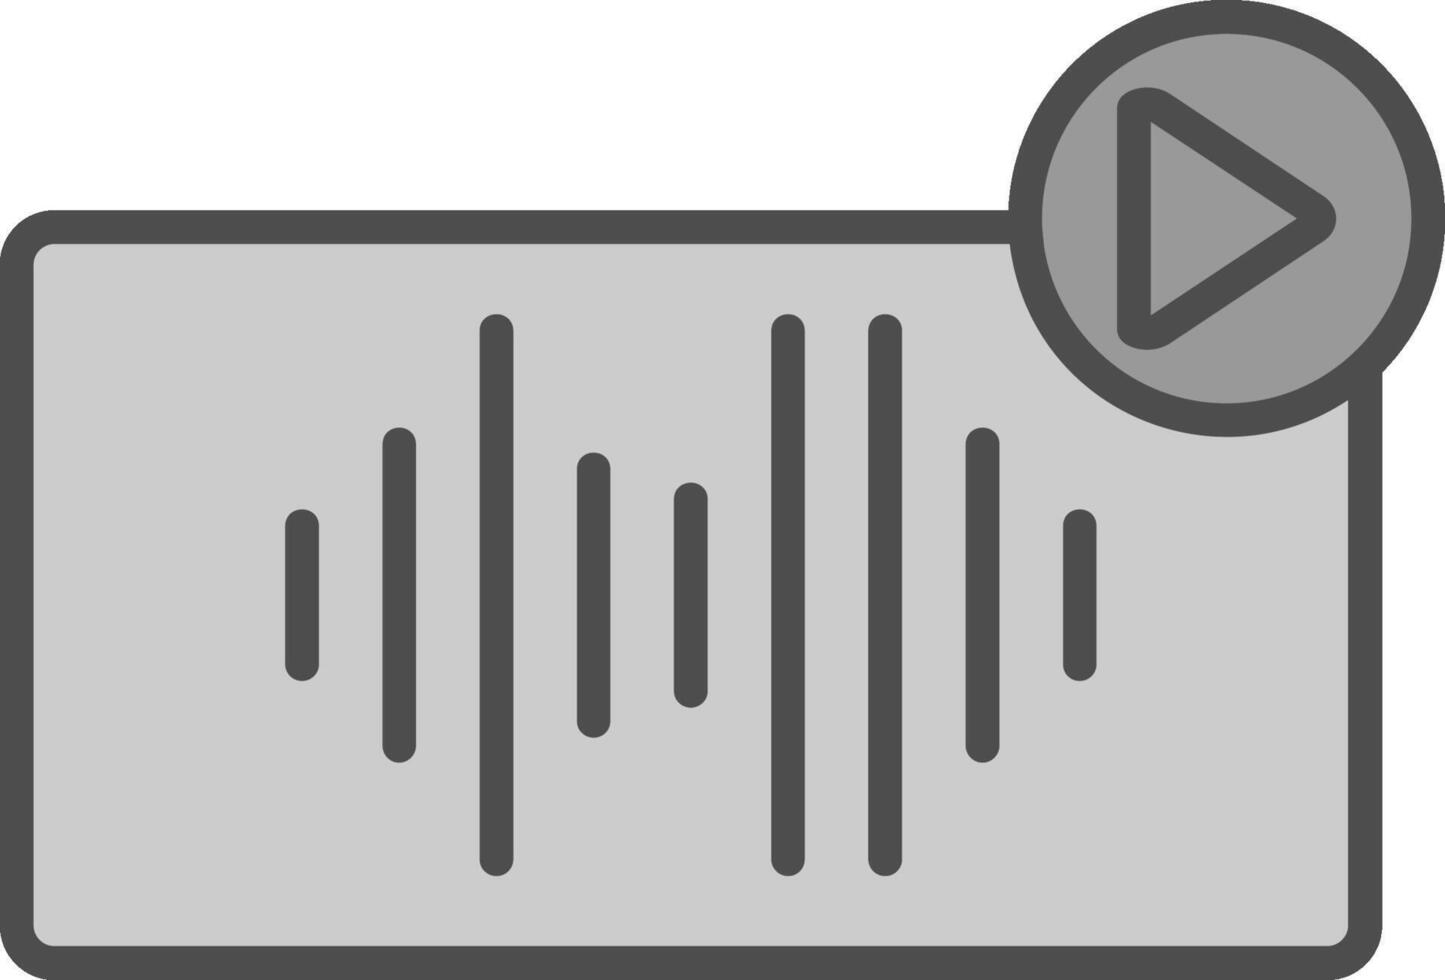 Audio Line Filled Greyscale Icon Design vector